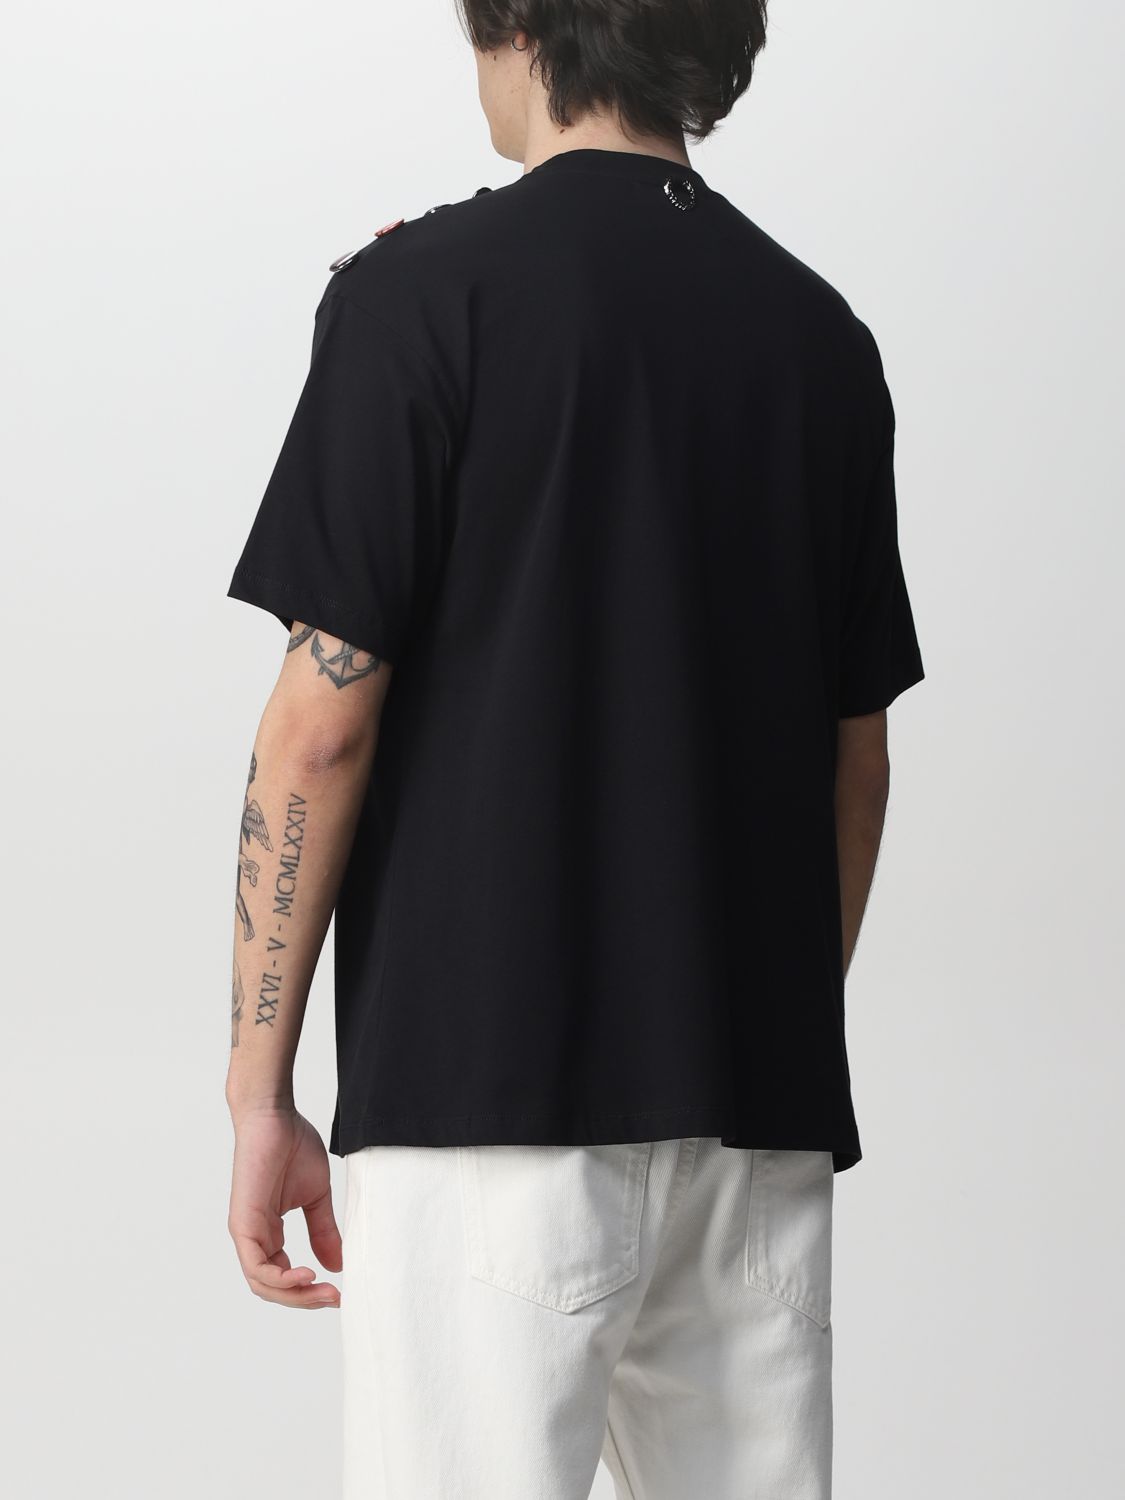 T-Shirt Fred Perry By Raf Simons: Fred Perry By Raf Simons Herren T-Shirt schwarz 2